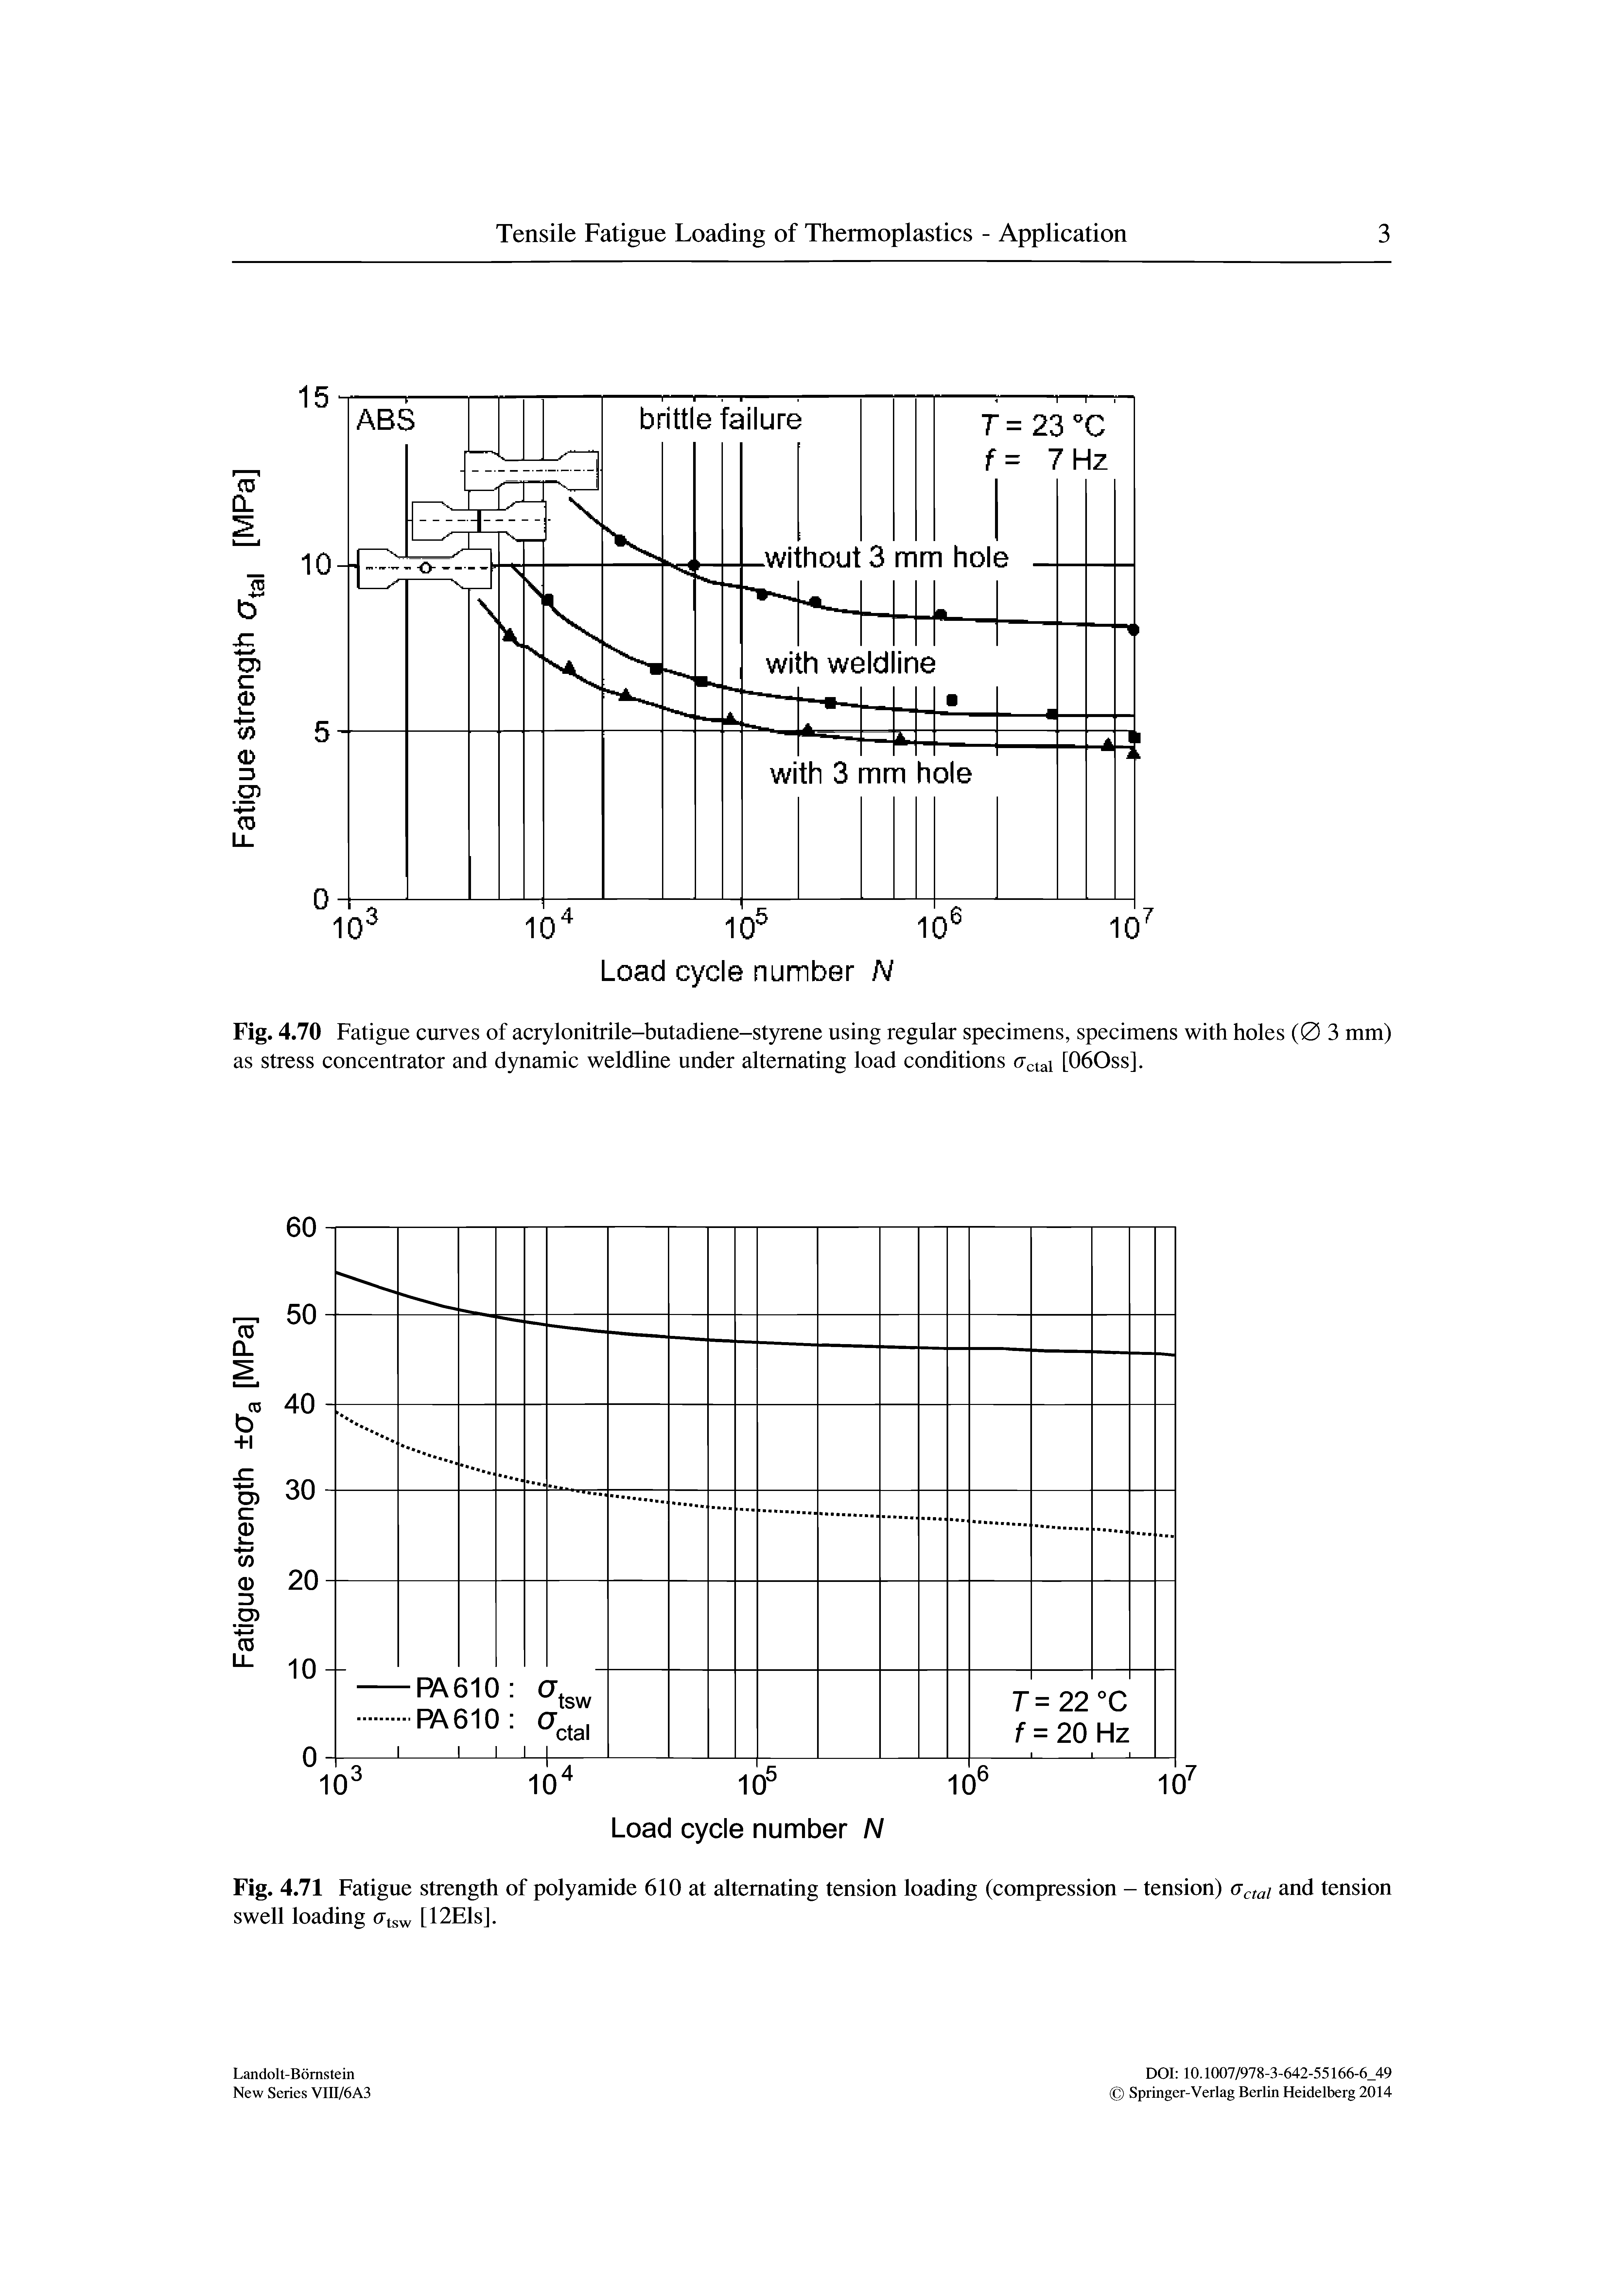 Fig. 4.70 Fatigue curves of acrylonitrile-butadiene-styrene using regular specimens, specimens with holes (0 3 mm) as stress concentrator and dynamic weldline under alternating load conditions cTdai [O60ss].